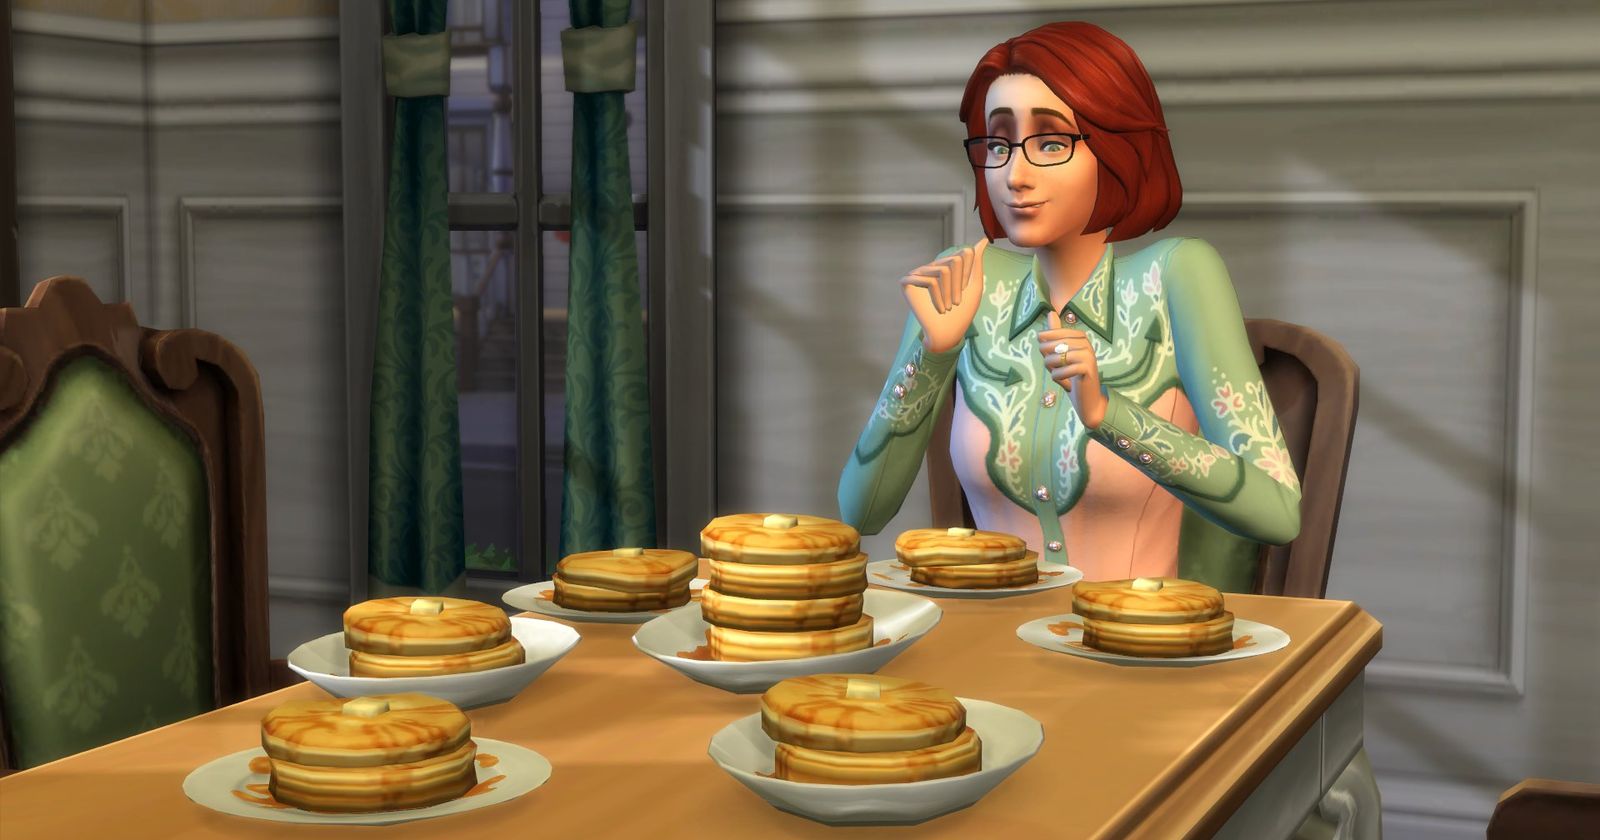 Sims 4 cheats: Full updated list of codes, from rosebud to